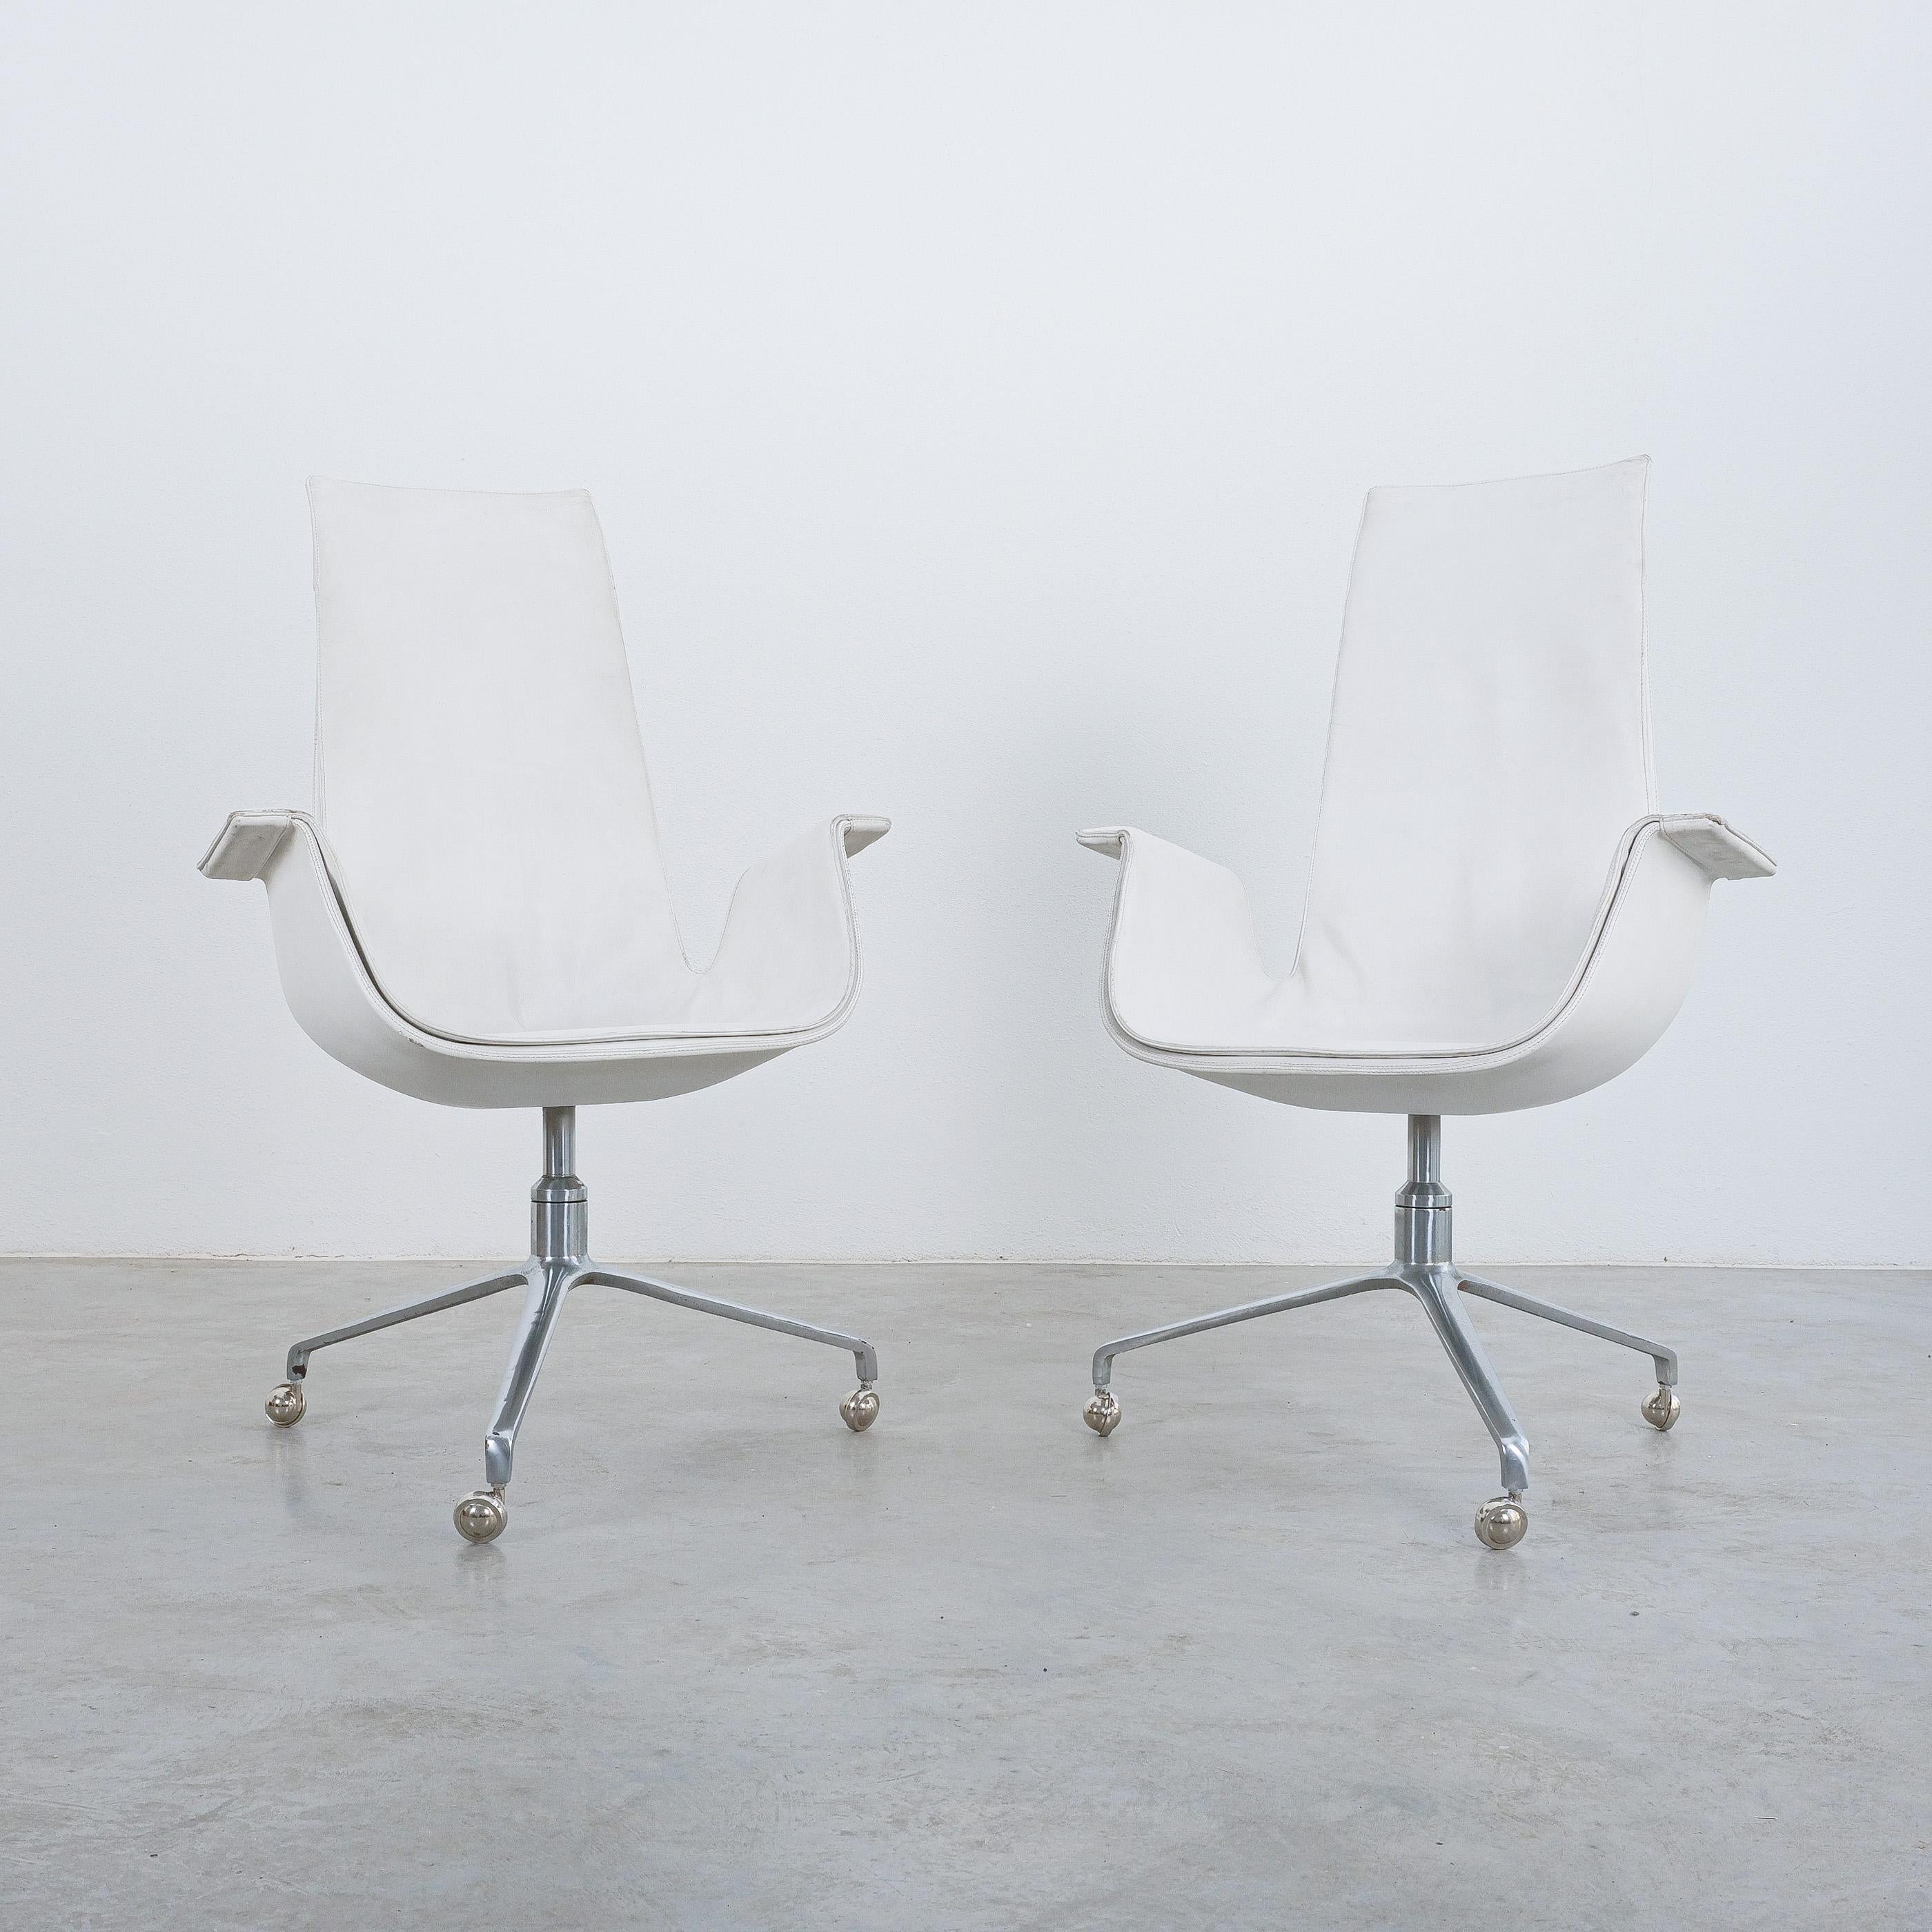 Fabricius and Kastholm White High Back Desk Chairs (3) Swivel Base FK 6725, 1964 For Sale 5